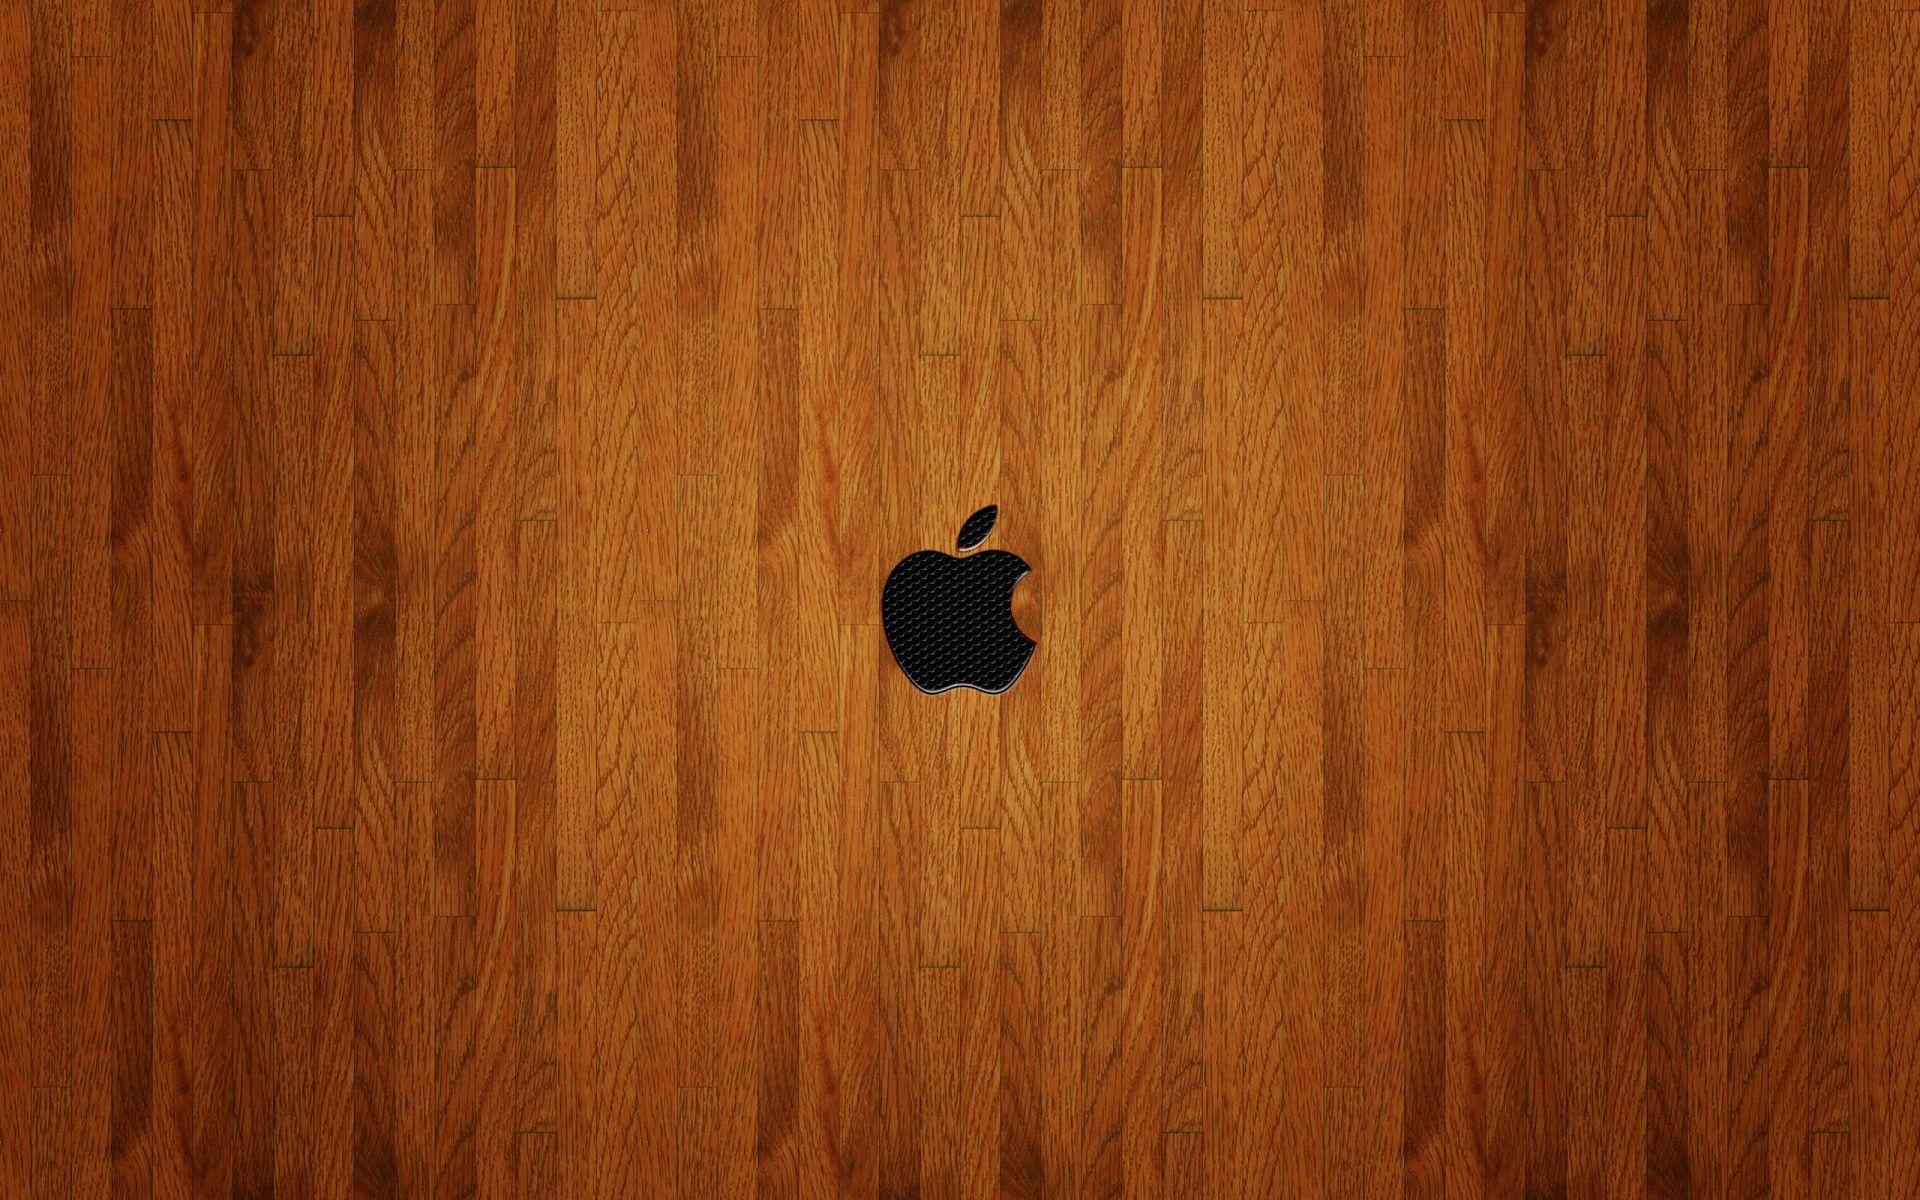 Apple Logo Wallpapers, High Definition Wallpapers, Free Apple